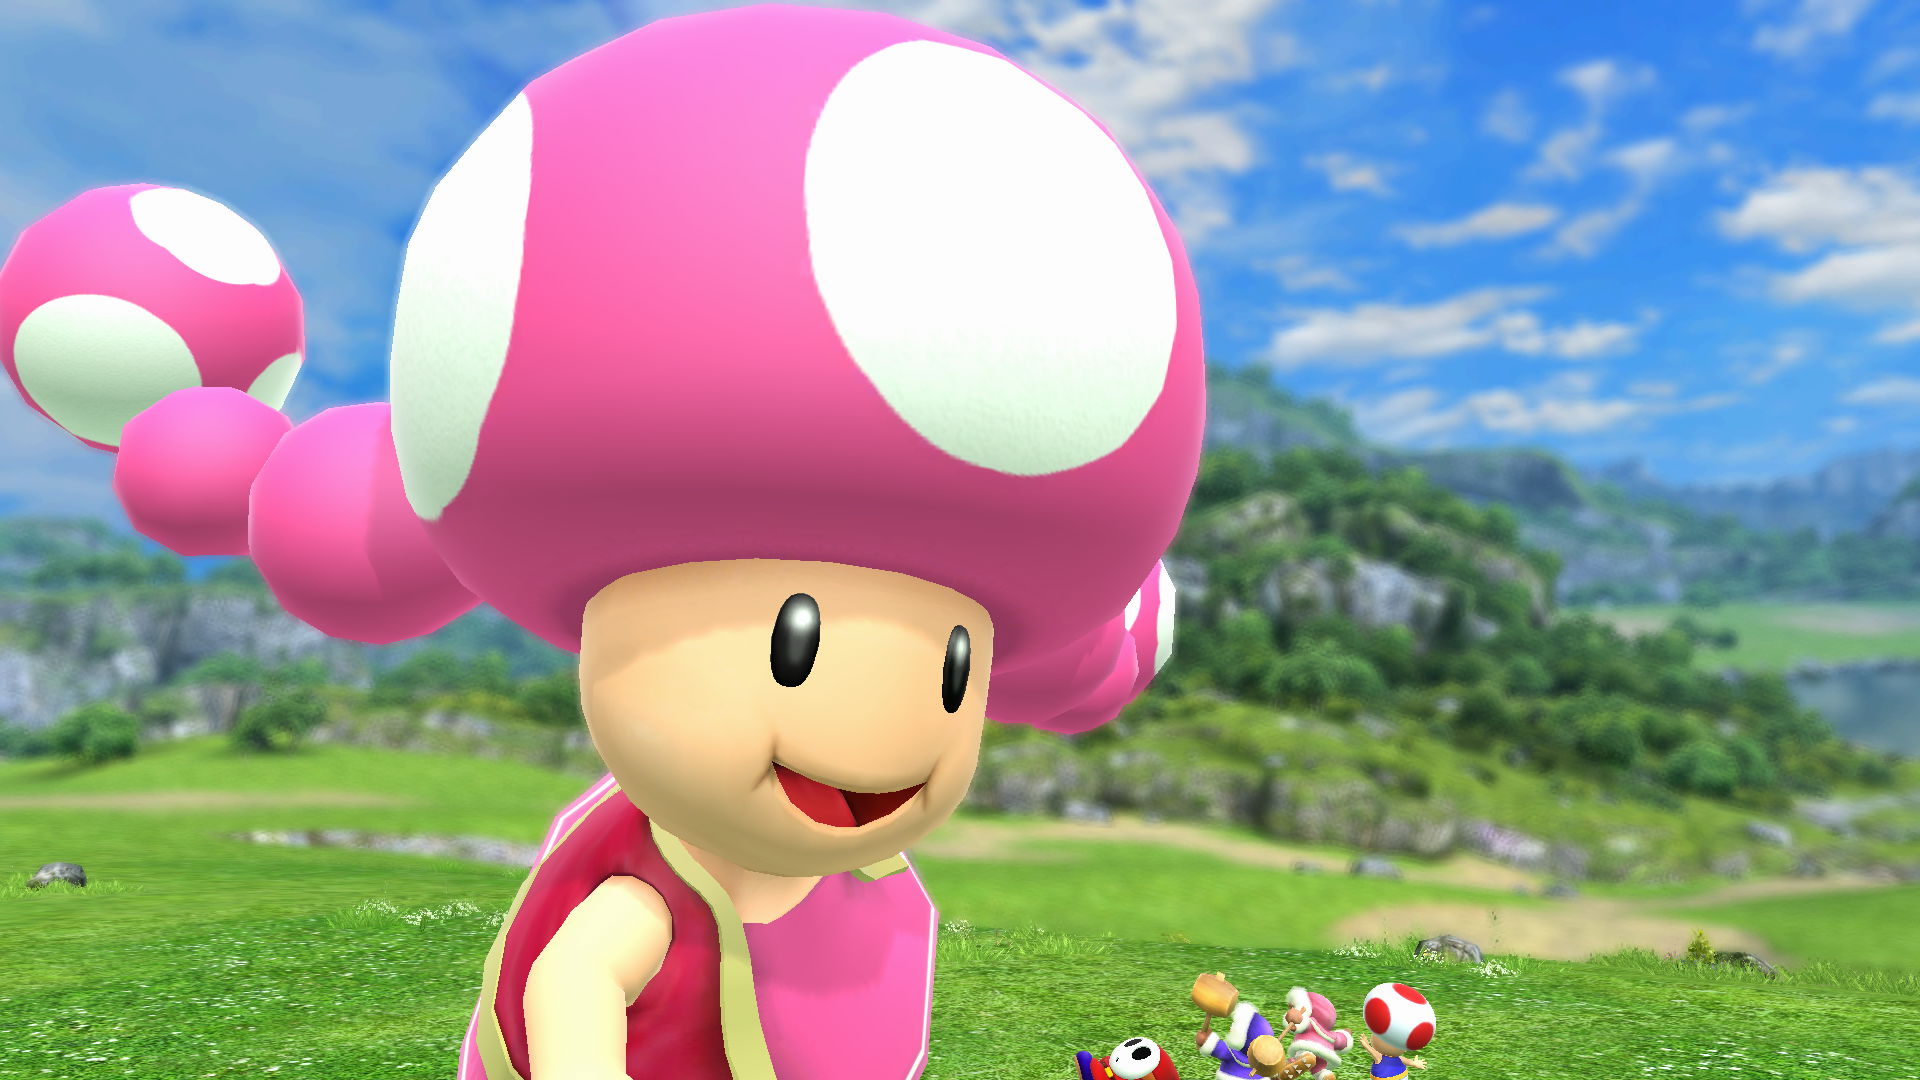 Giant Toadette staring 